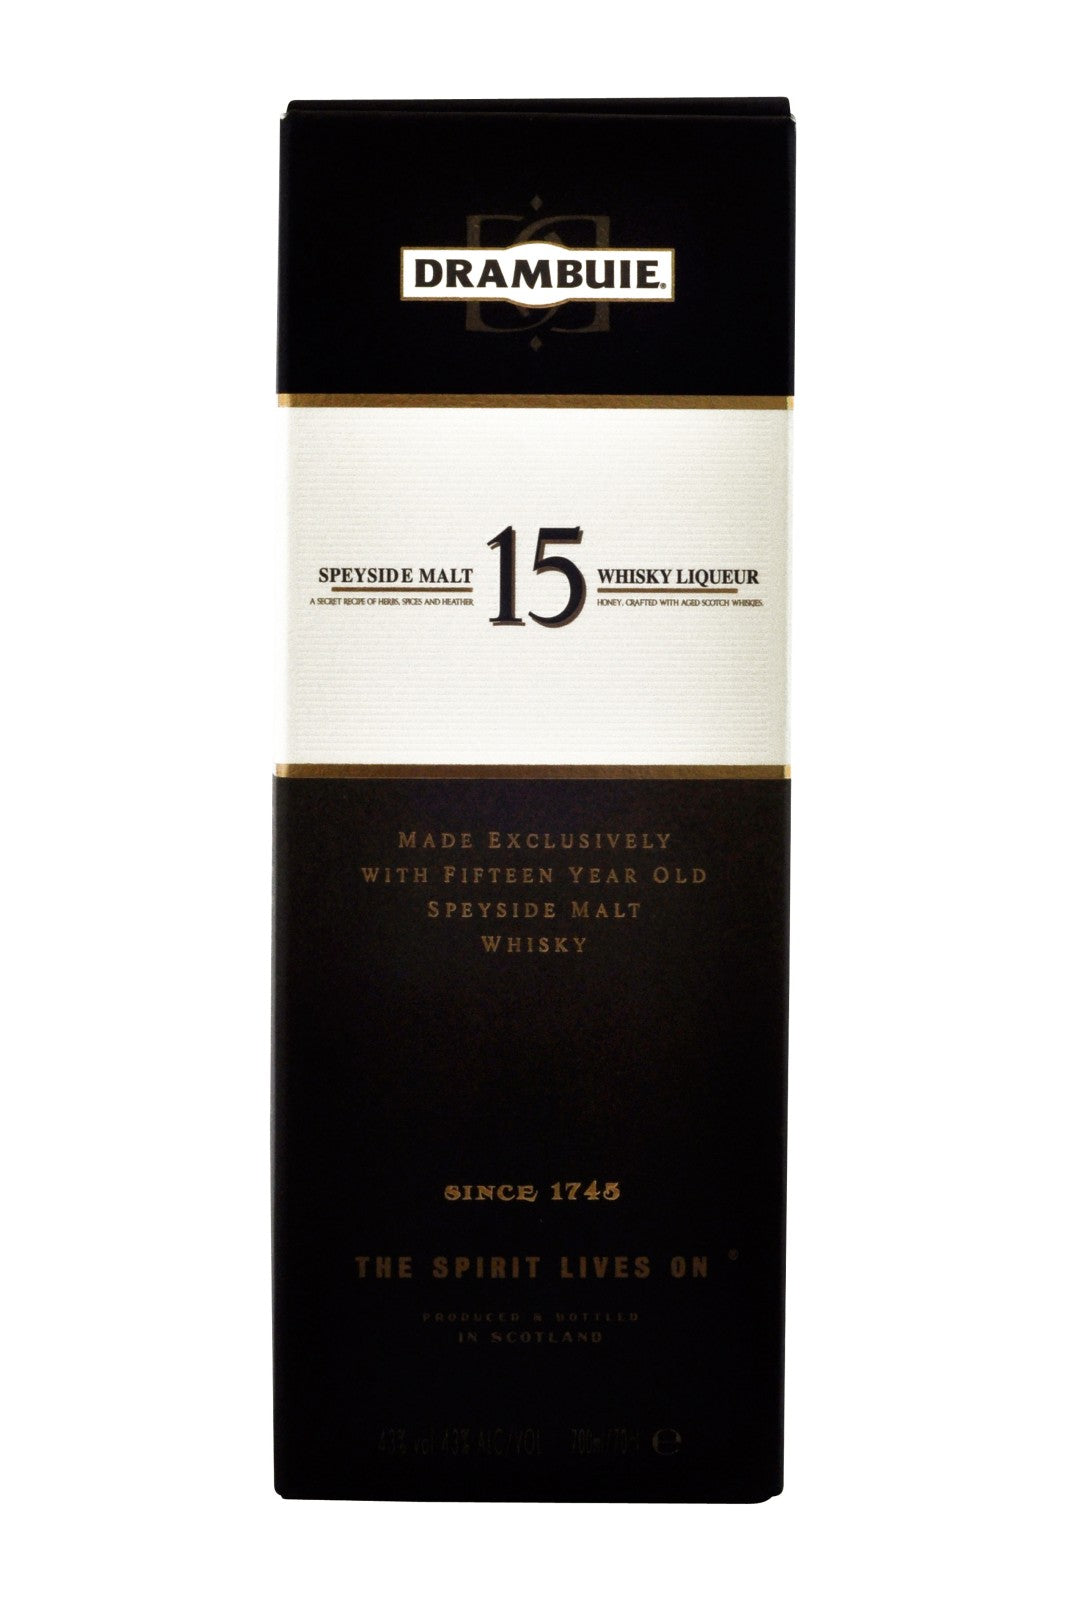 Drambuie 15 Year Old Whisky Liqueur